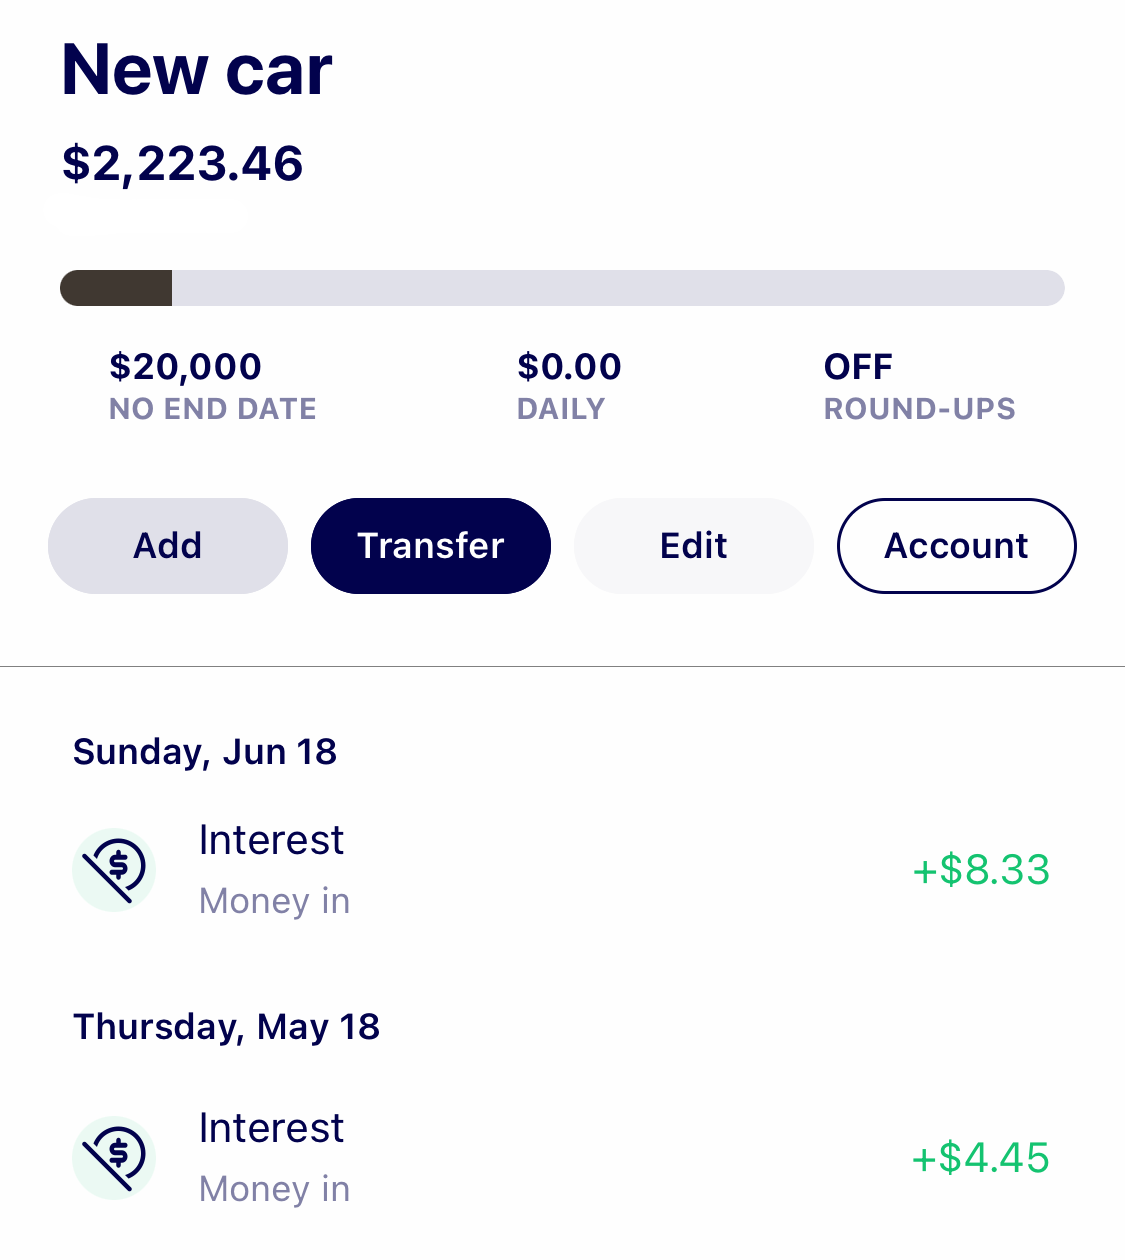 Screenshot of a Milli Jar for a New car showing interest payments of $8.33 on June 18 and $4.45 on May 18. The interest paid showcases how a higher annual percentage yield can help you reach your savings goals faster.